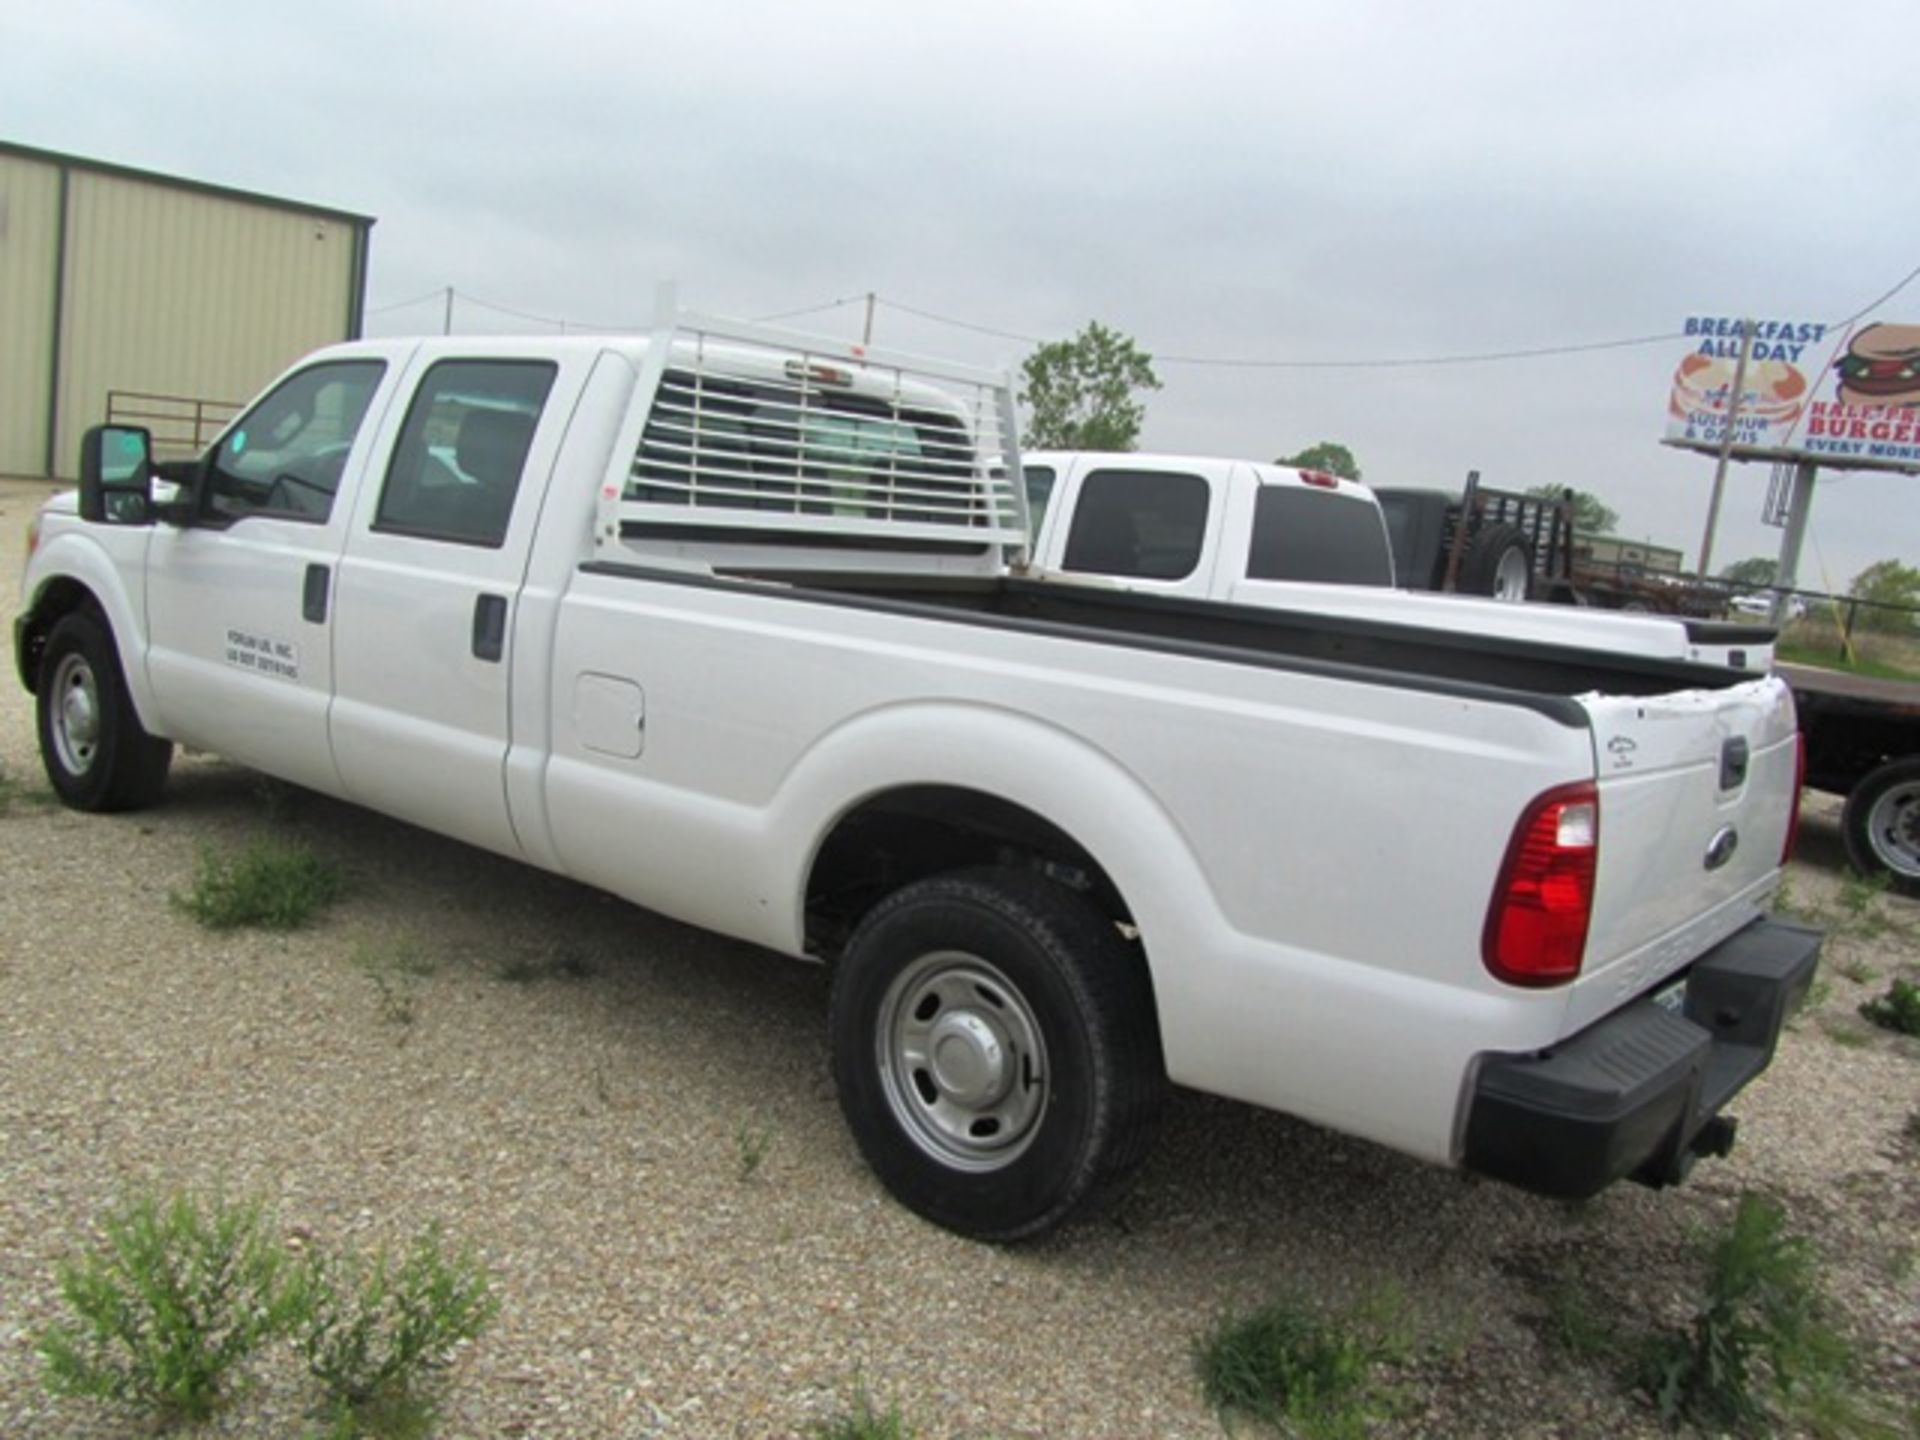 Ford F250 Super Duty Pick-Up Truck - Image 3 of 4